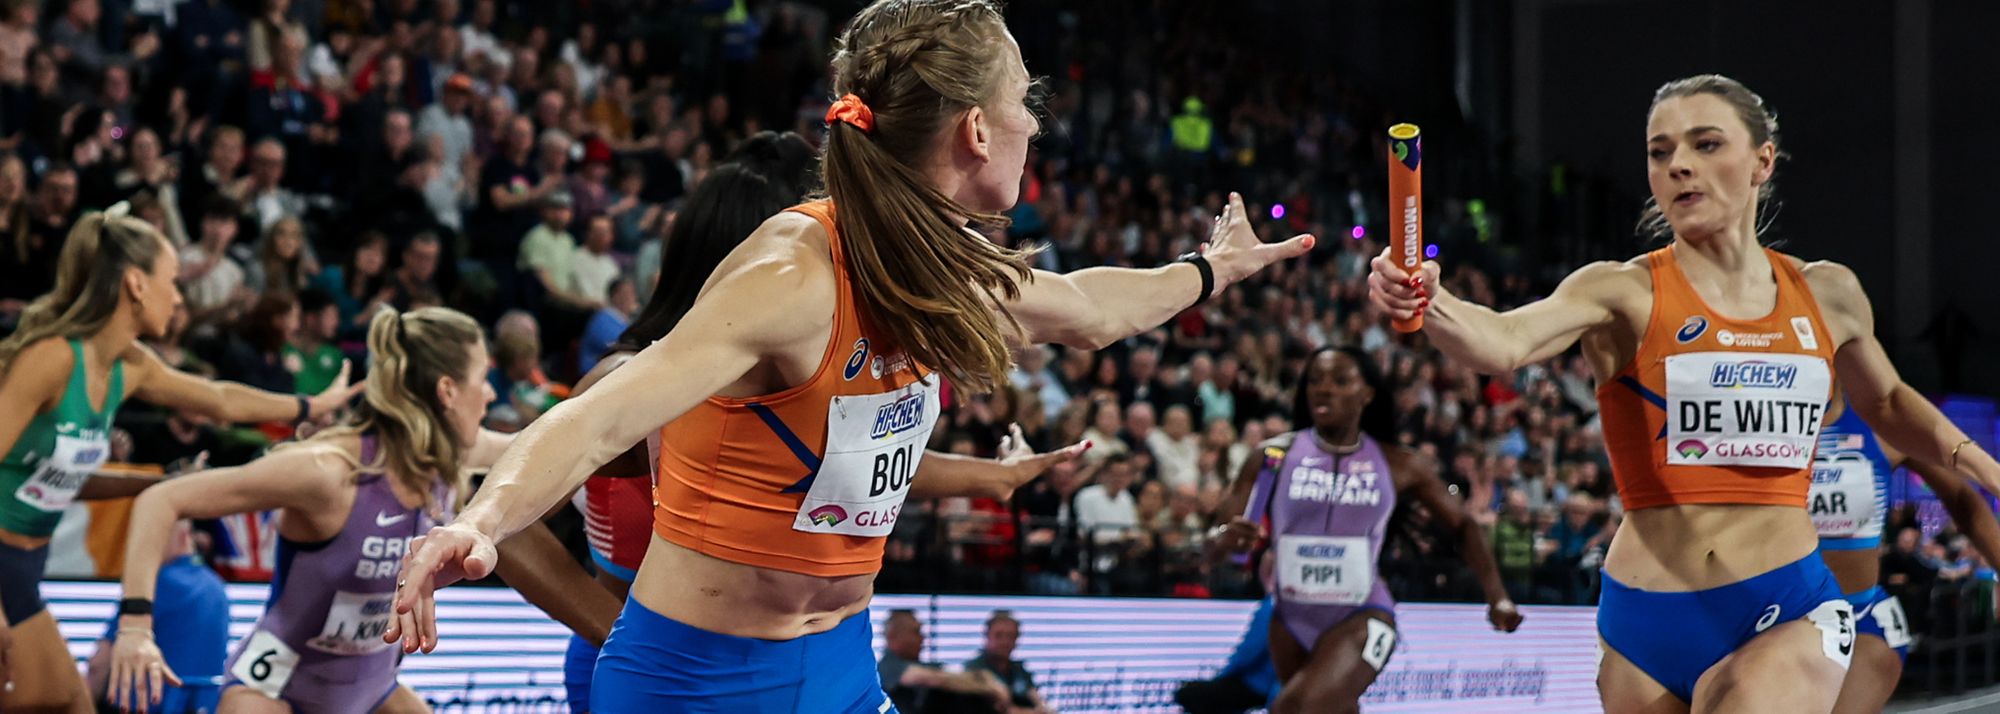 The World Athletics Indoor Championships Glasgow 24 concluded on Sunday after three days of thrilling action that kicked off a busy year of top-level competition in the sport